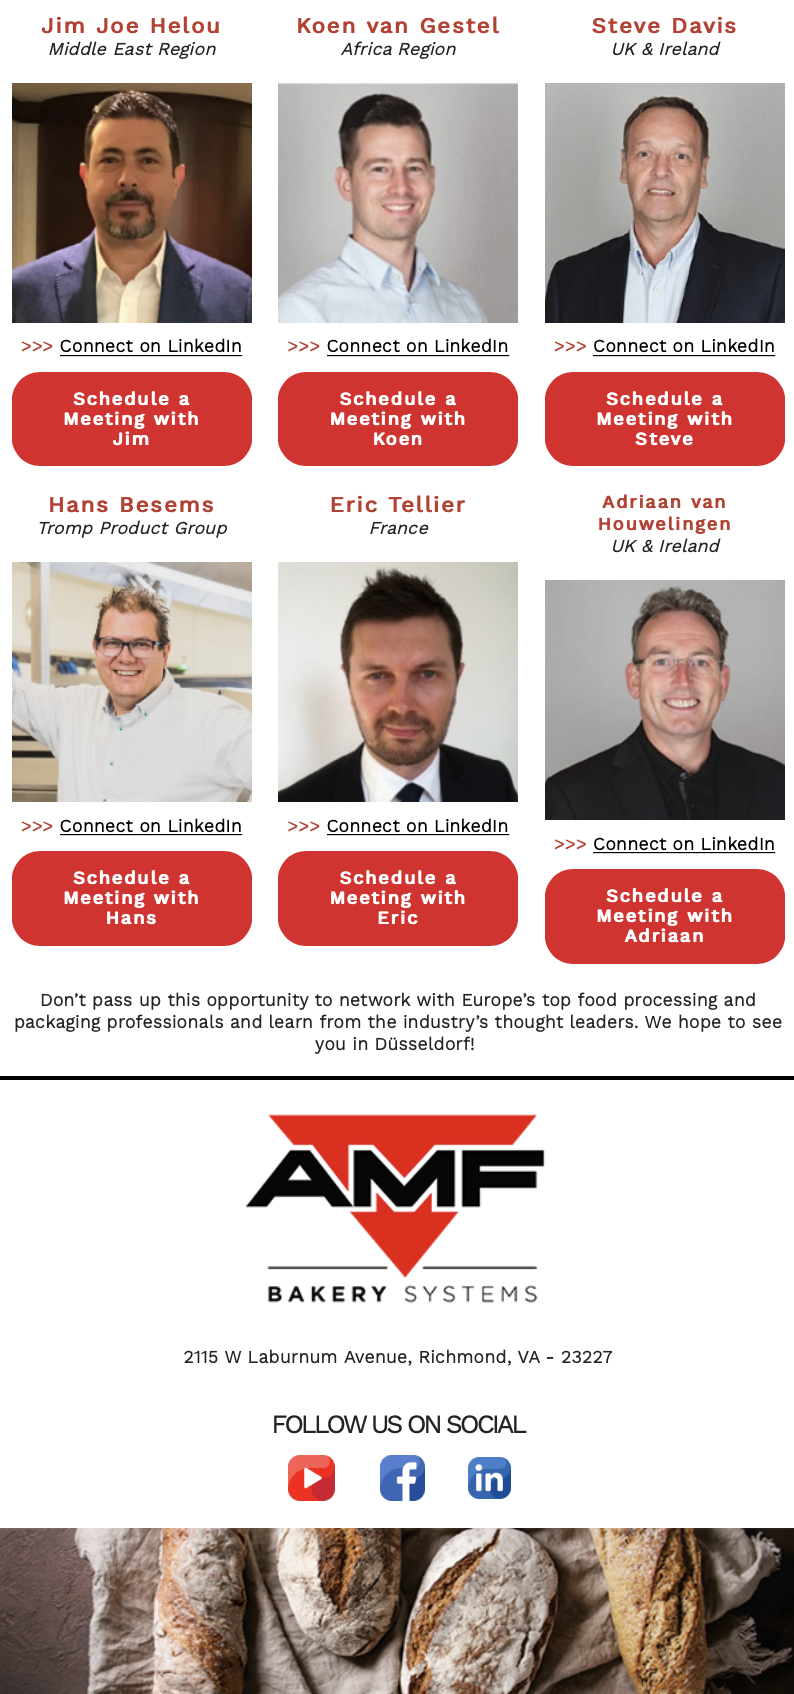 AMF bakery systems email